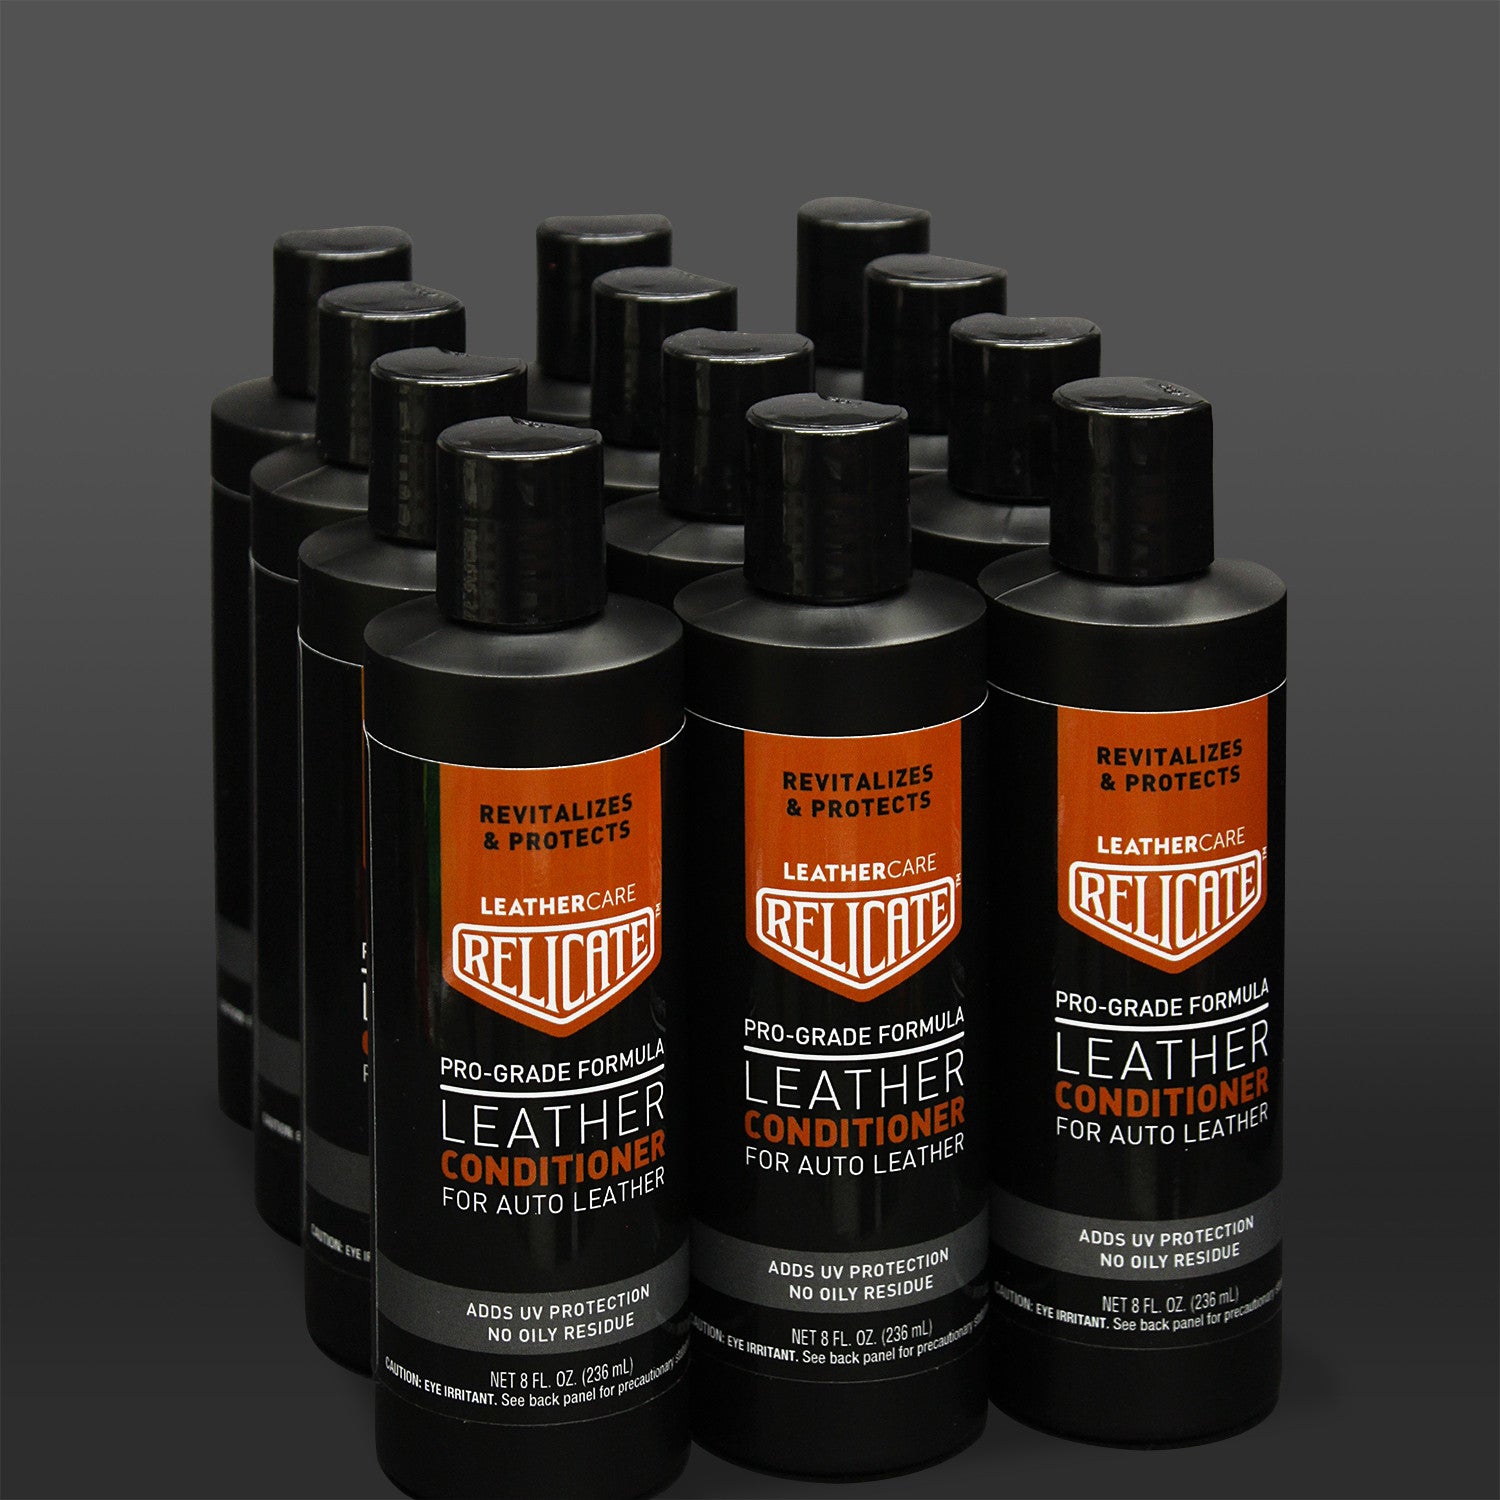 Relicate Leather Conditioner